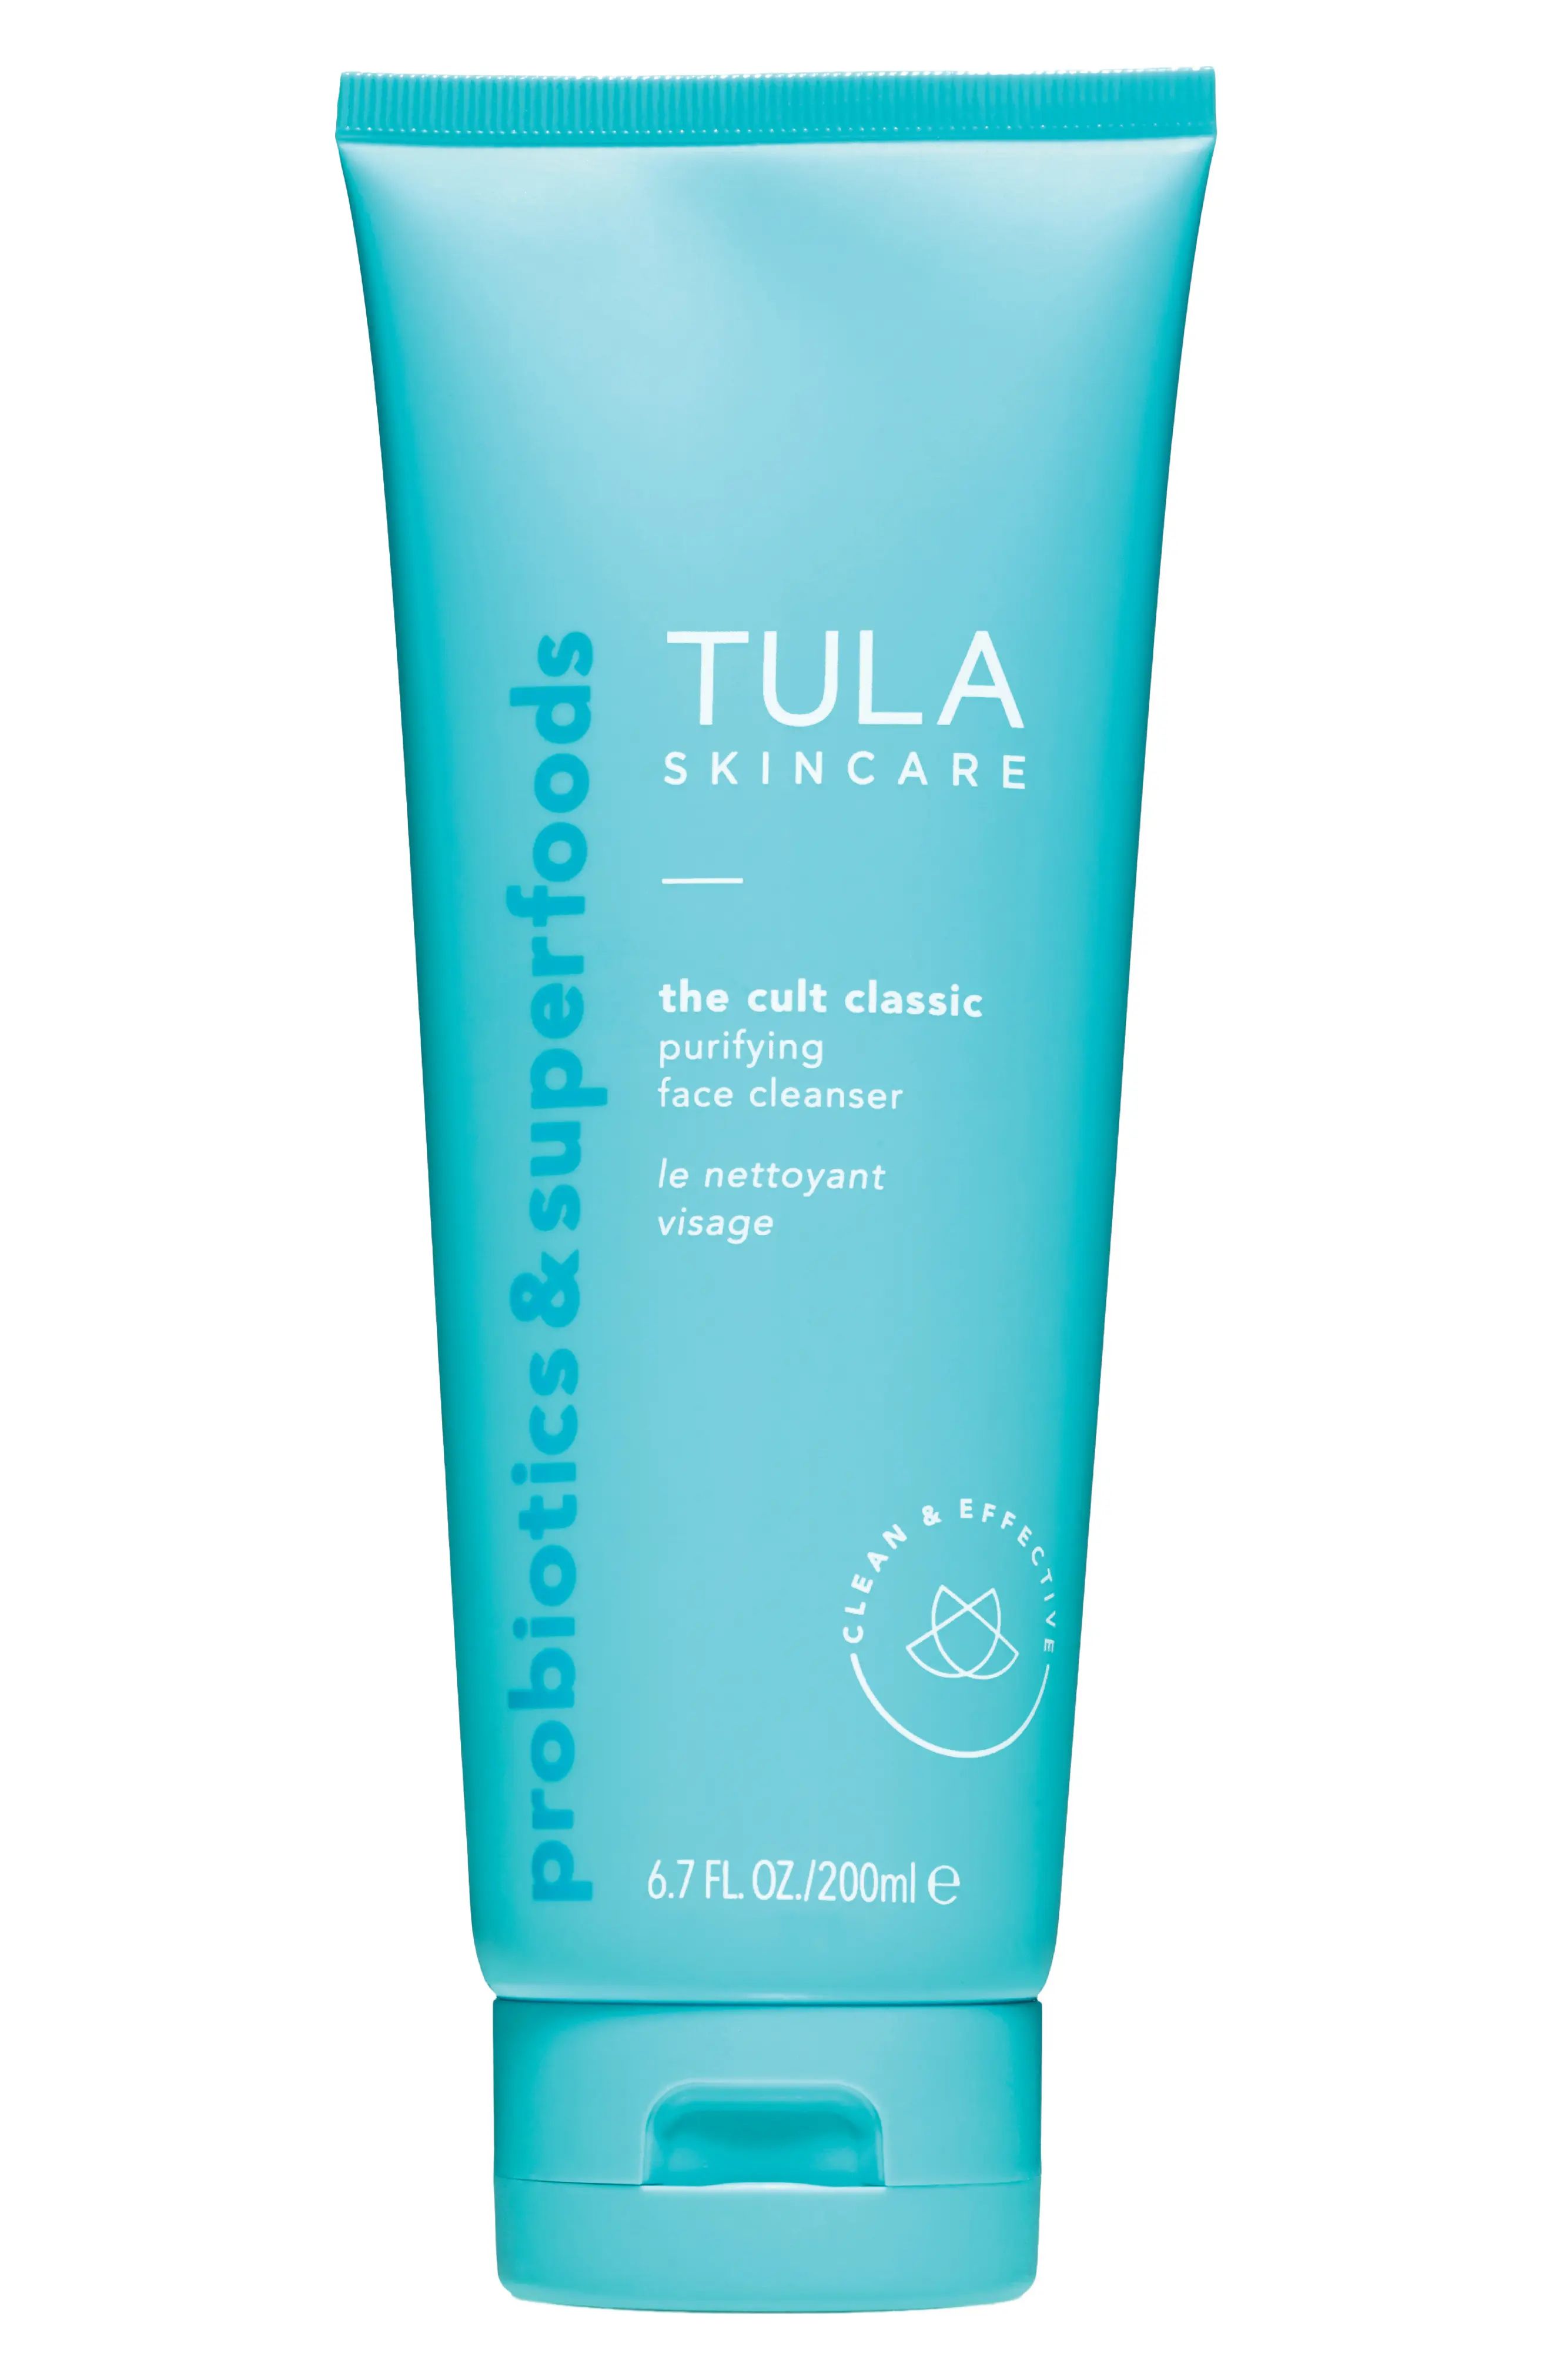 Tula Skincare The Cult Classic Purifying Face Cleanser, Size 6.7 oz | Nordstrom